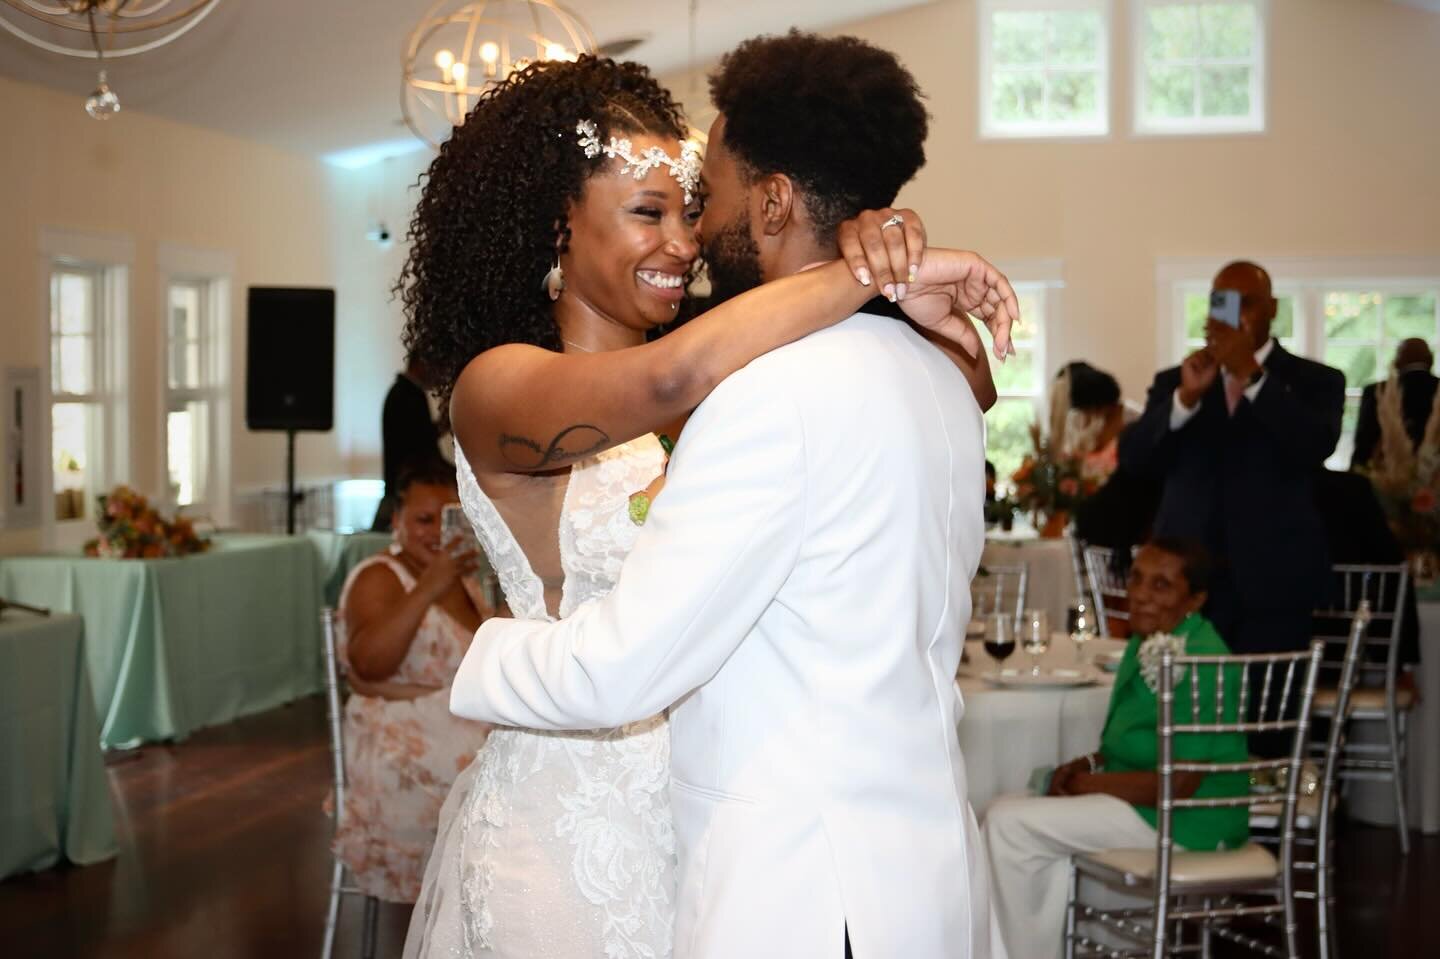 This. This moment right here is what it&rsquo;s all about. First dance bliss here at Milton Ridge. 💖🎶

#miltonridge #wedding #firstdance #marylandwedding #mdwedding #dmvwedding #weddinginspiration #2024wedding #marylandweddingvenue #marylandwedding